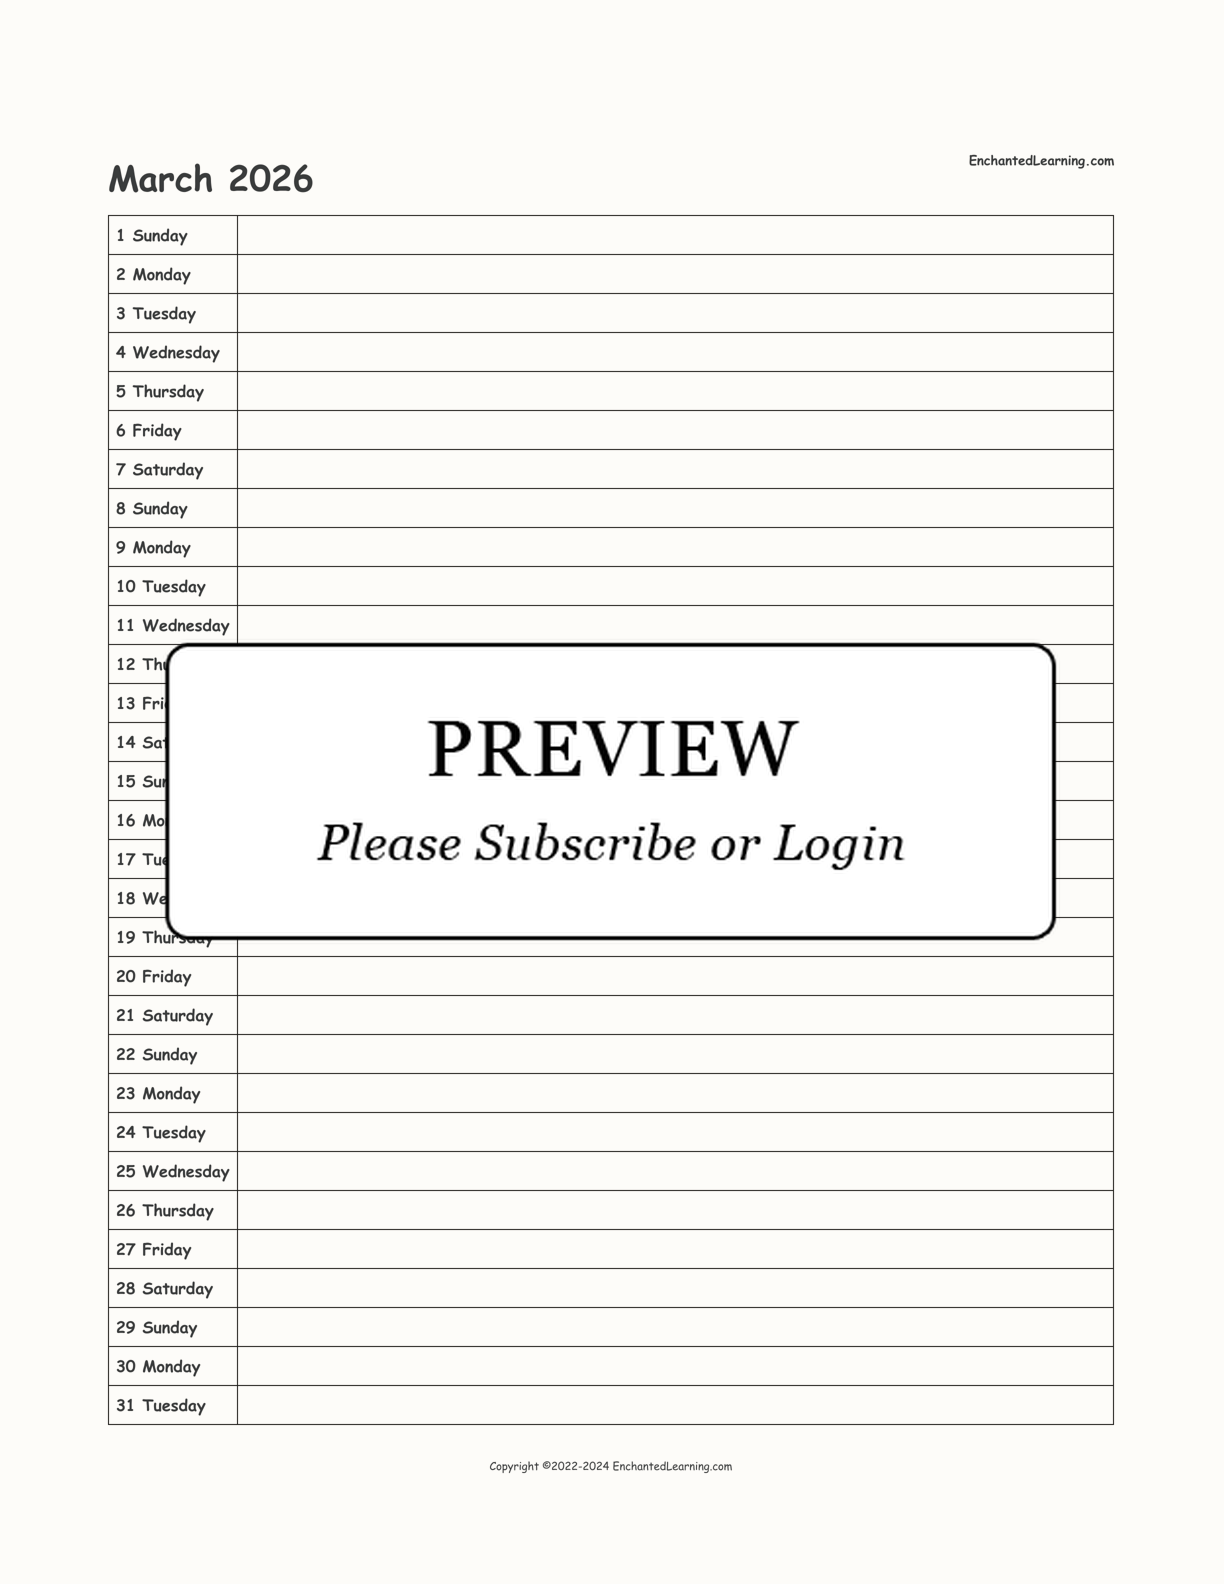 2026 Scheduling Calendar interactive printout page 3